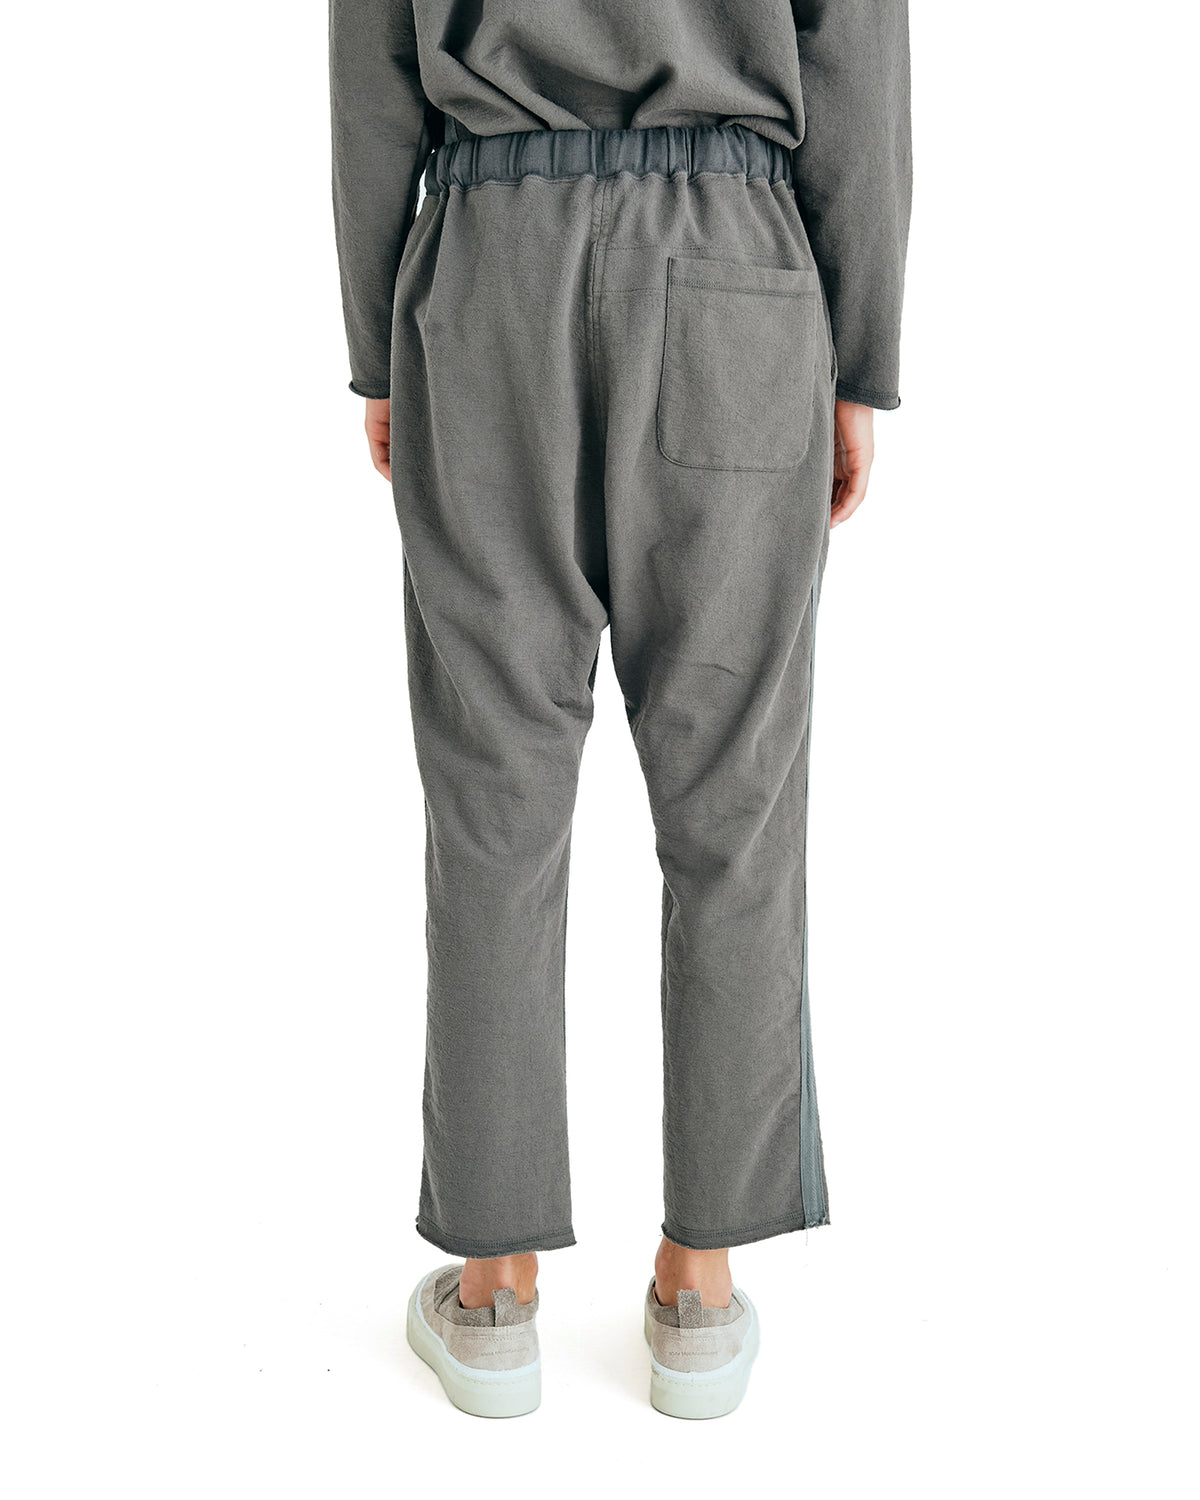 White Mountaineering | Taped Pants Charcoal - Concrete